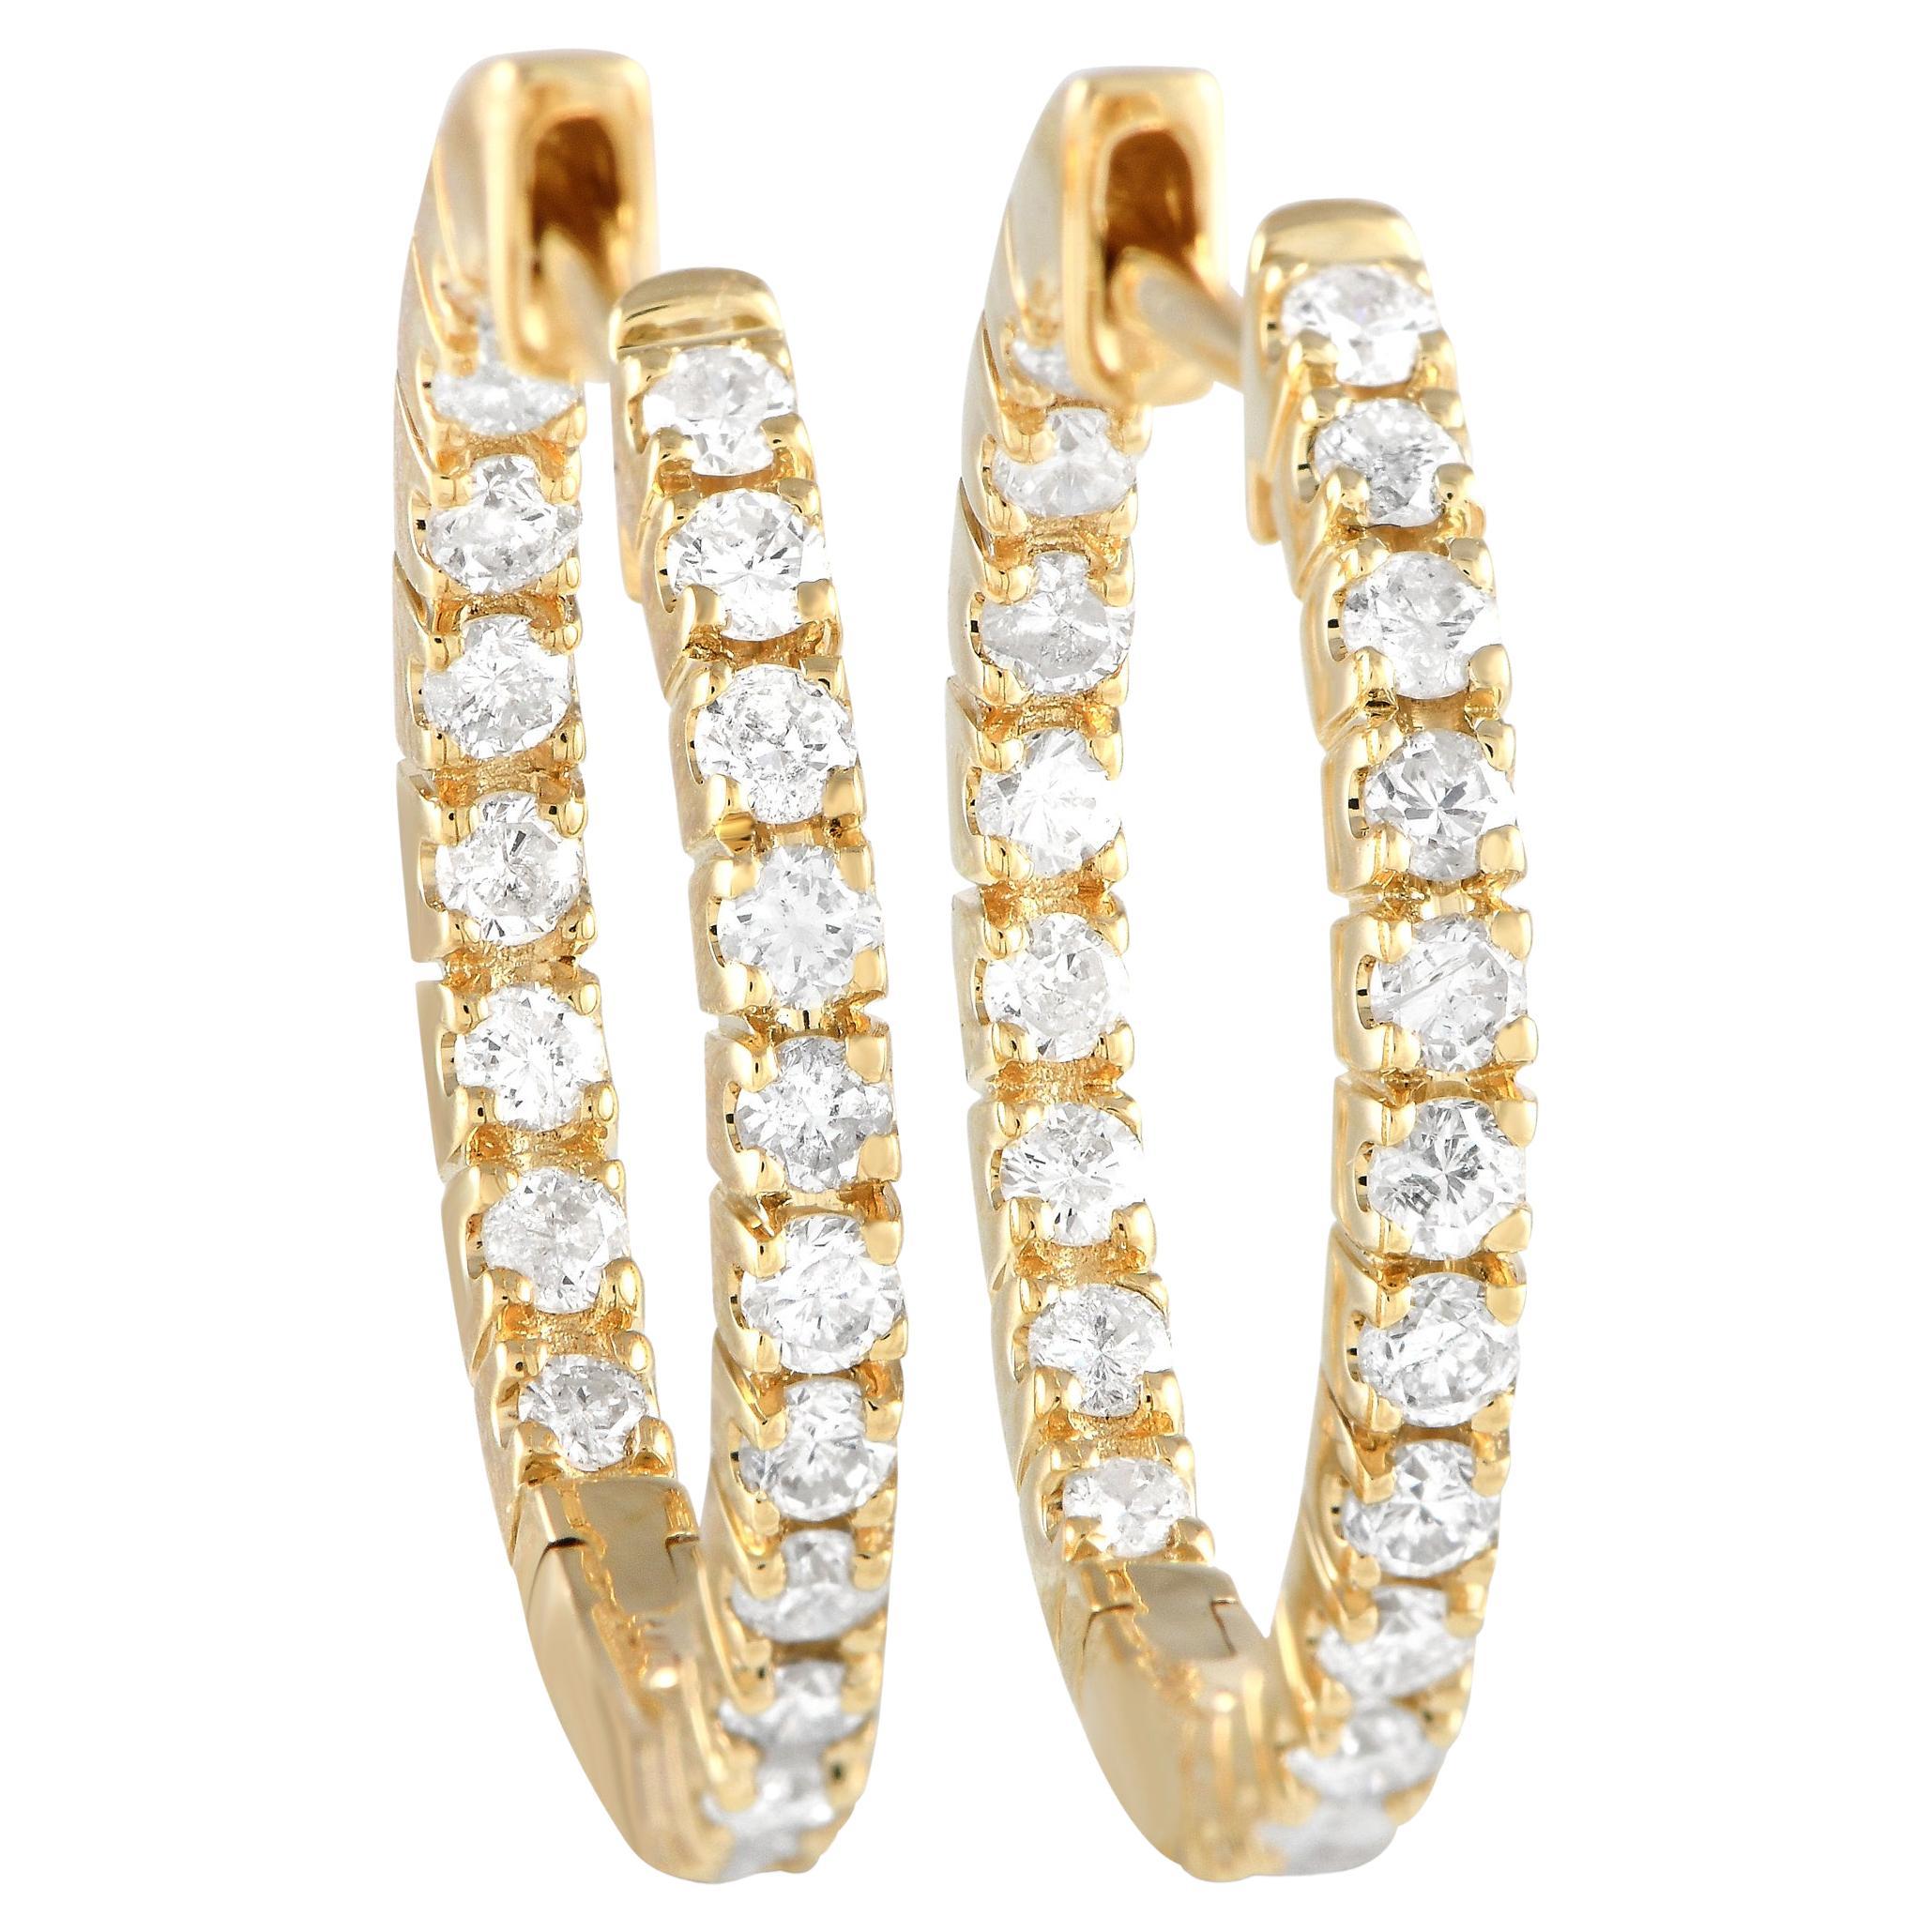 LB Exclusive 14K Yellow Gold 0.81 Carat Diamond Inside-Out Hoop Earrings For Sale